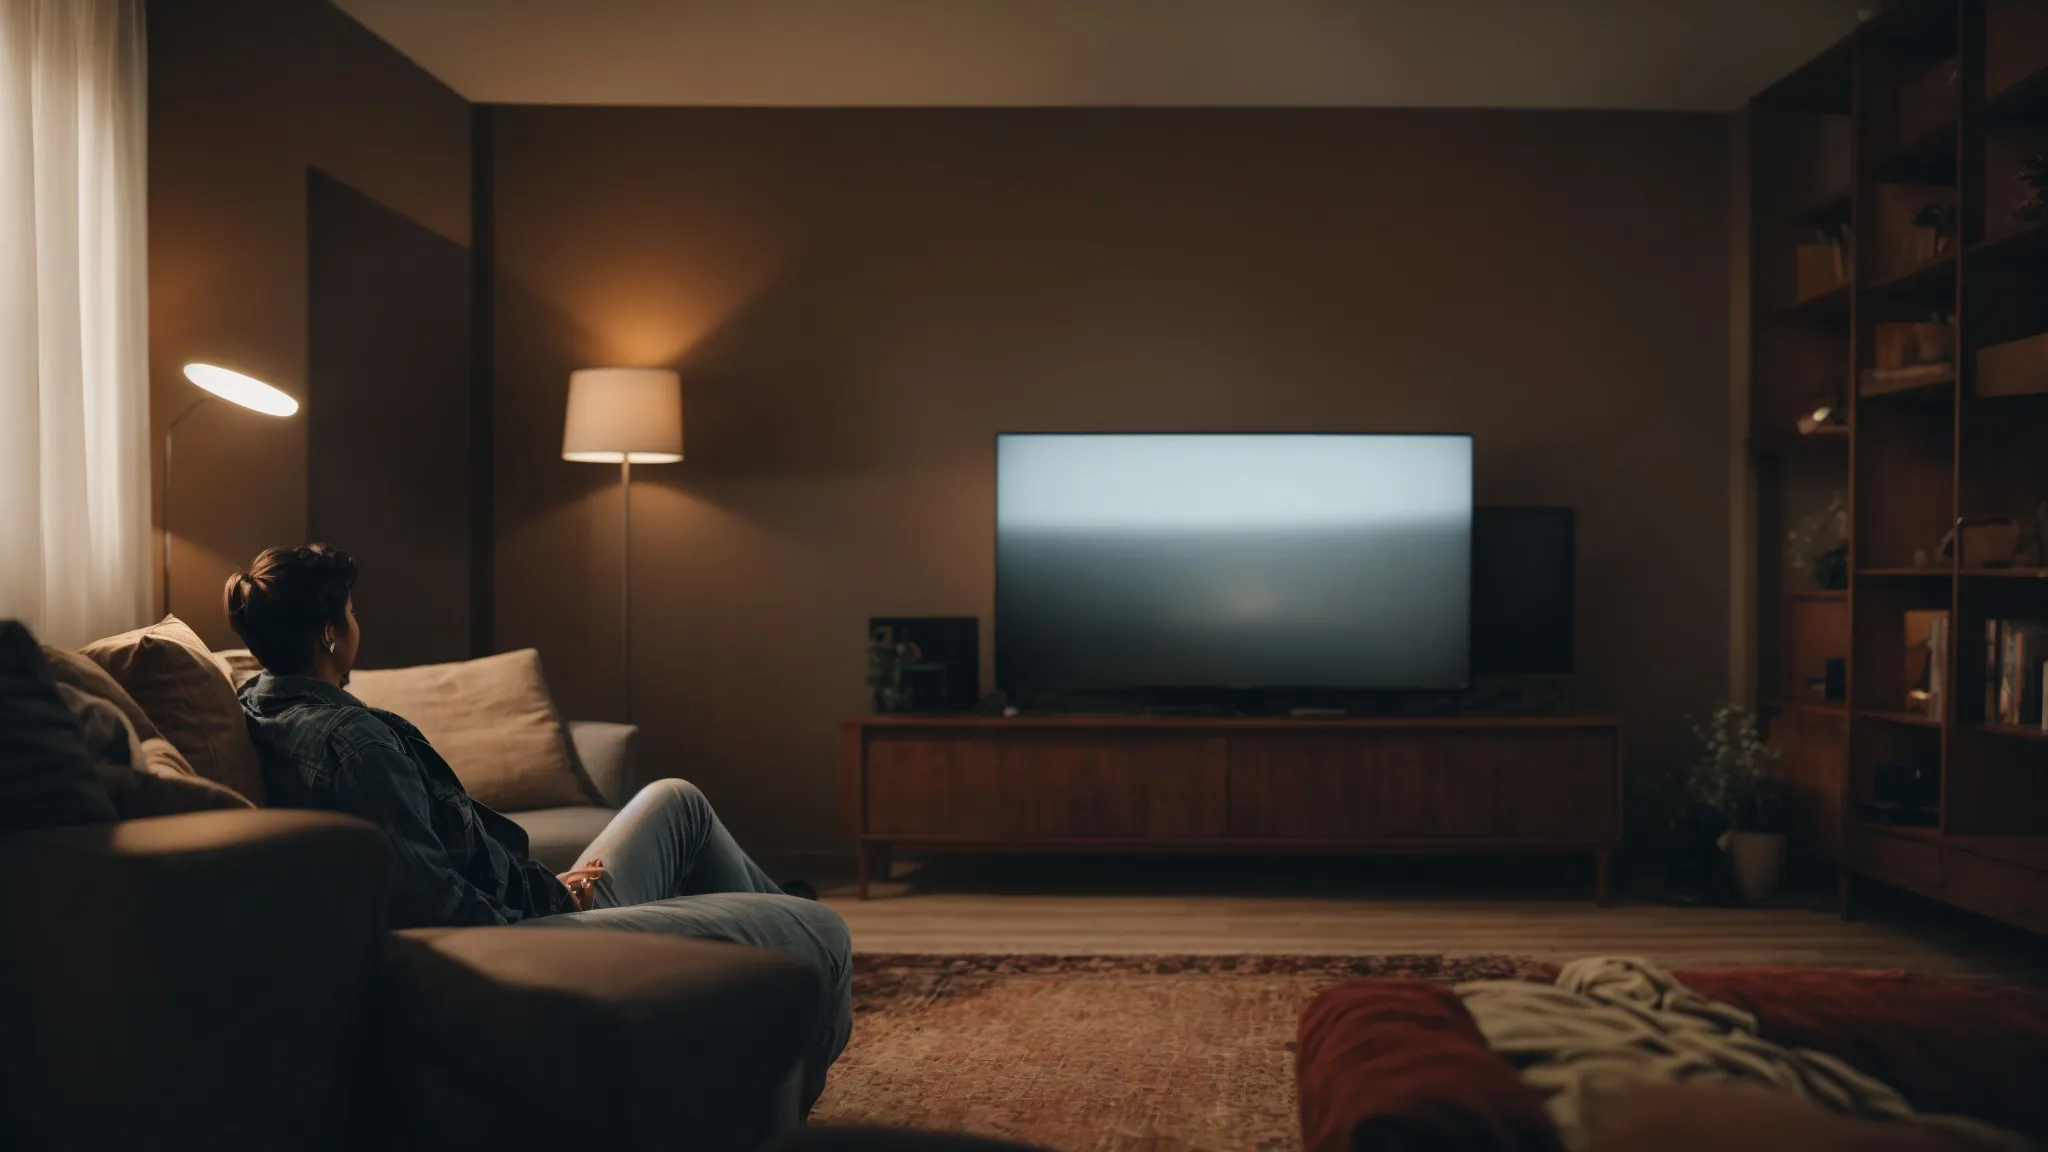 a person smiling, sitting comfortably in a living room, watching a tv screen with a remote in hand.